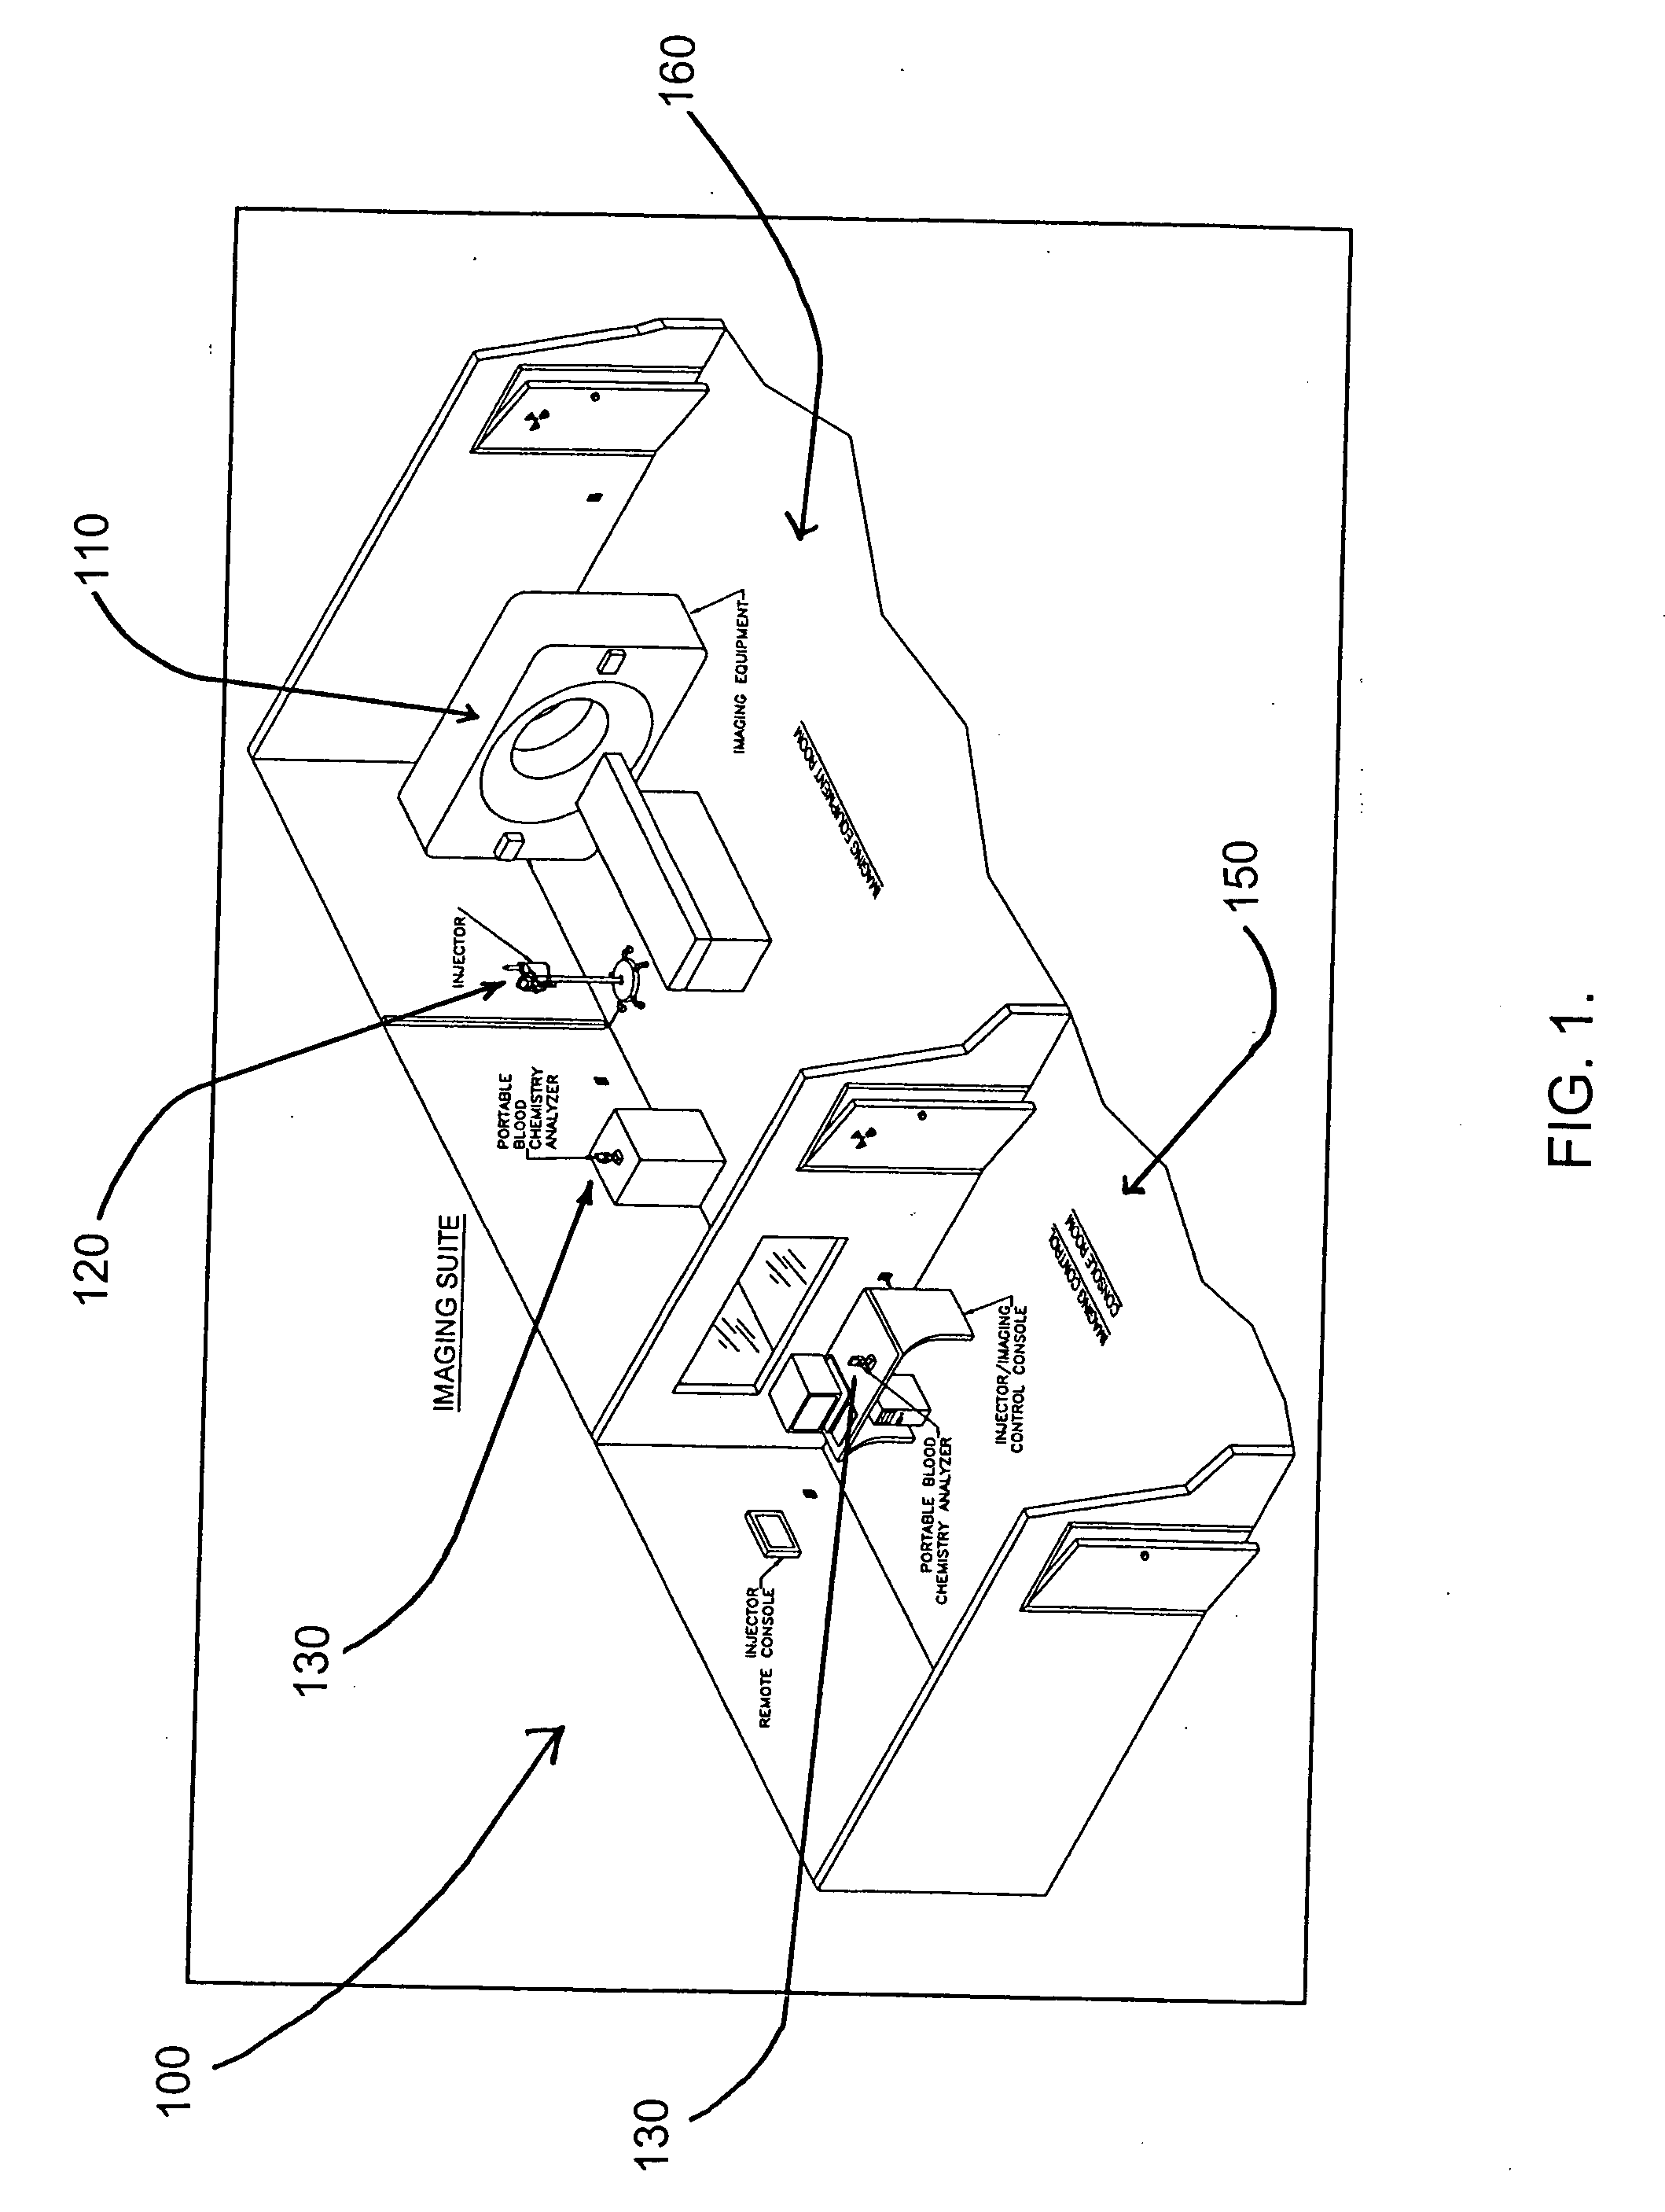 Medical imaging system, dispensing system, method, and computer program product for assessing patient renal function prior to dispensing a contrast media as part of a medical imaging procedure